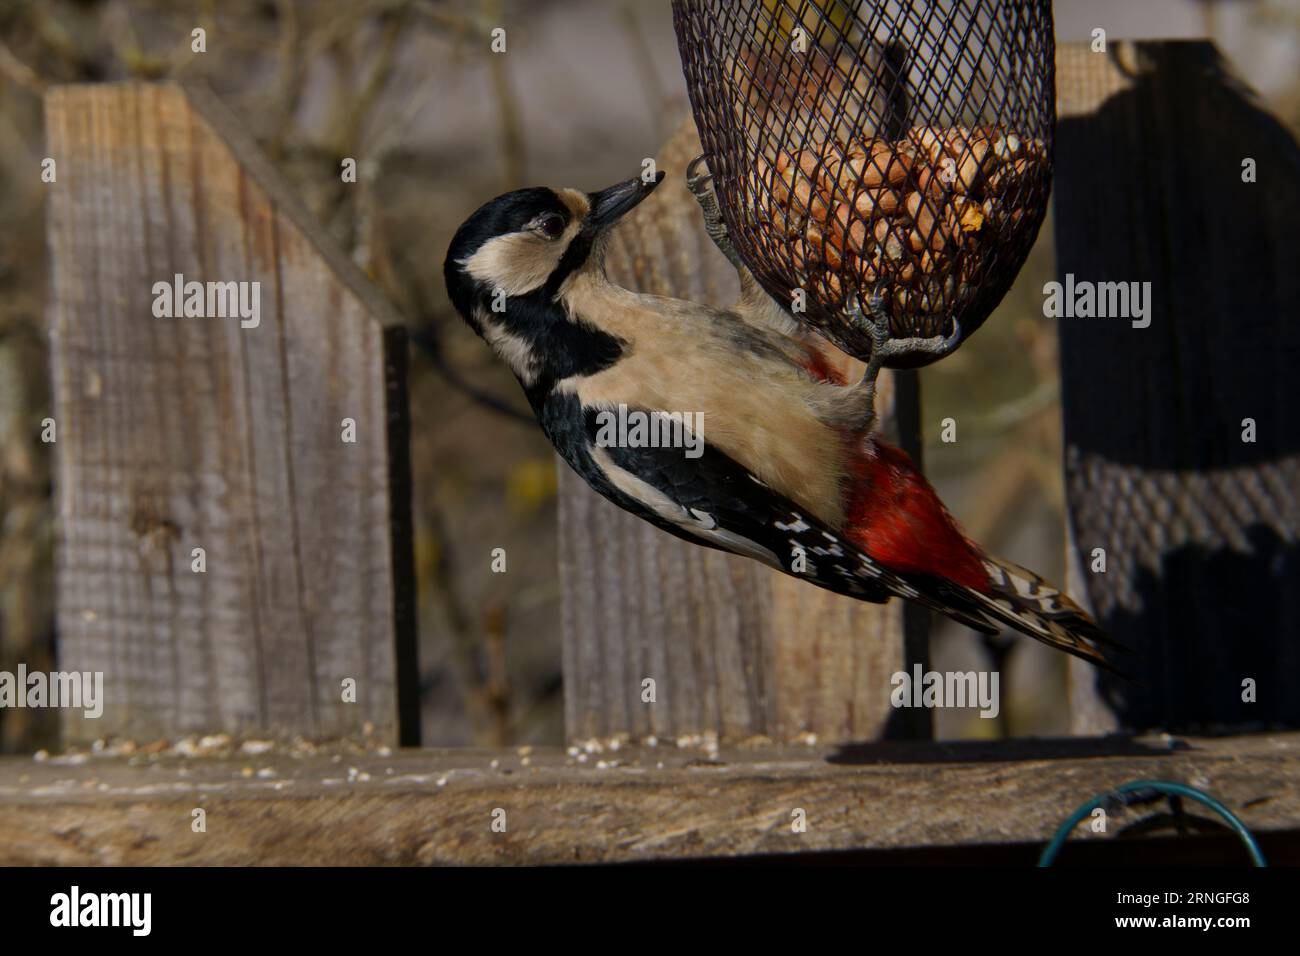 Dendrocopos major Family Picidae Genus Dendrocopos Great spotted woodpecker wild nature bird eats peanuts photography, picture, wallpaper Stock Photo